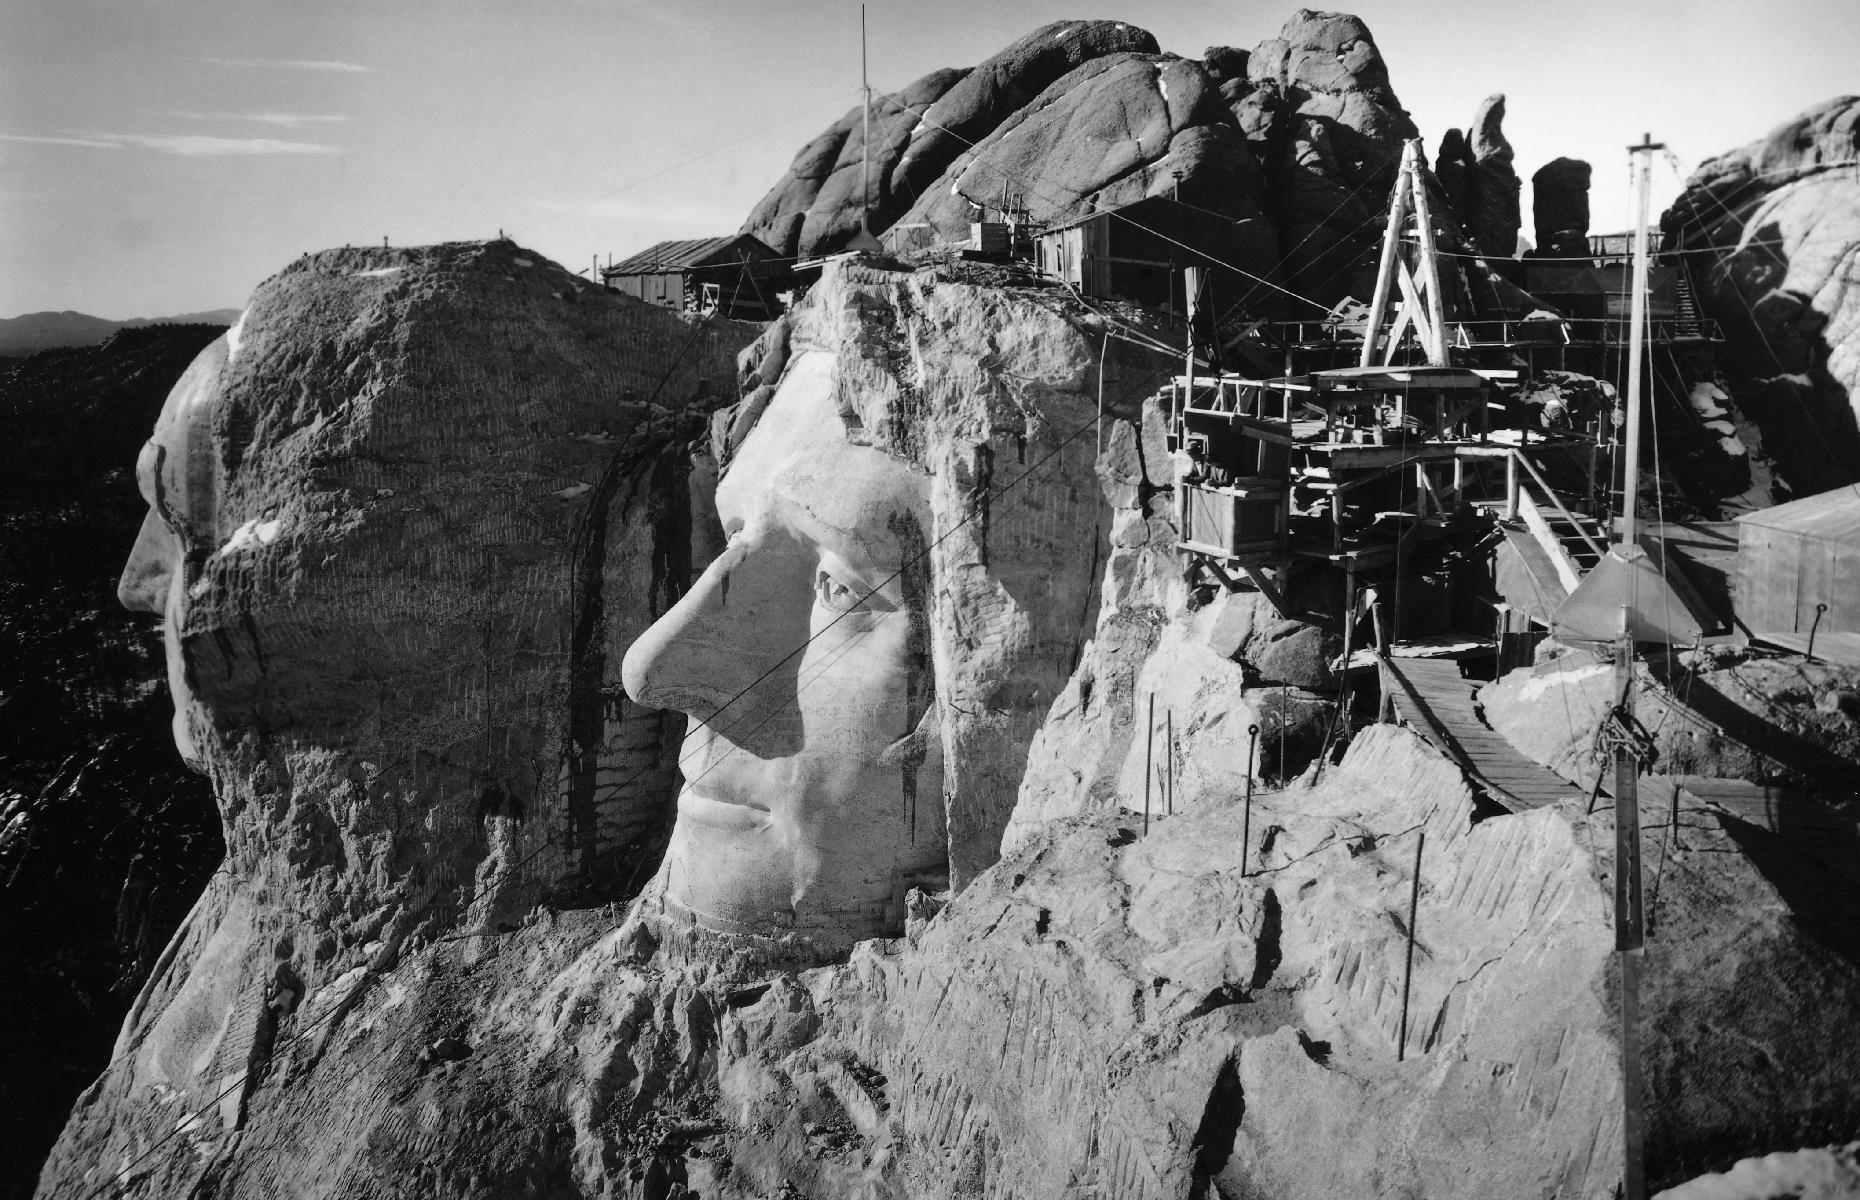 <p>The monument to four presidents of America – George Washington, Thomas Jefferson, Theodore Roosevelt and Abraham Lincoln – was carved into the rock in South Dakota’s Black Hills region between 1927 and 1941. Pictured here during construction in 1940 is the profile of Jefferson and the outline of Washington in the distance, as seen from the top of Lincoln's head. Today, Mount Rushmore is a popular landmark usually receiving around two million visitors a year. <a href="https://www.loveexploring.com/galleries/92983/hidden-secrets-of-americas-tourist-attractions?page=1">Check out the hidden secrets of this and other American tourist attractions here</a>.</p>